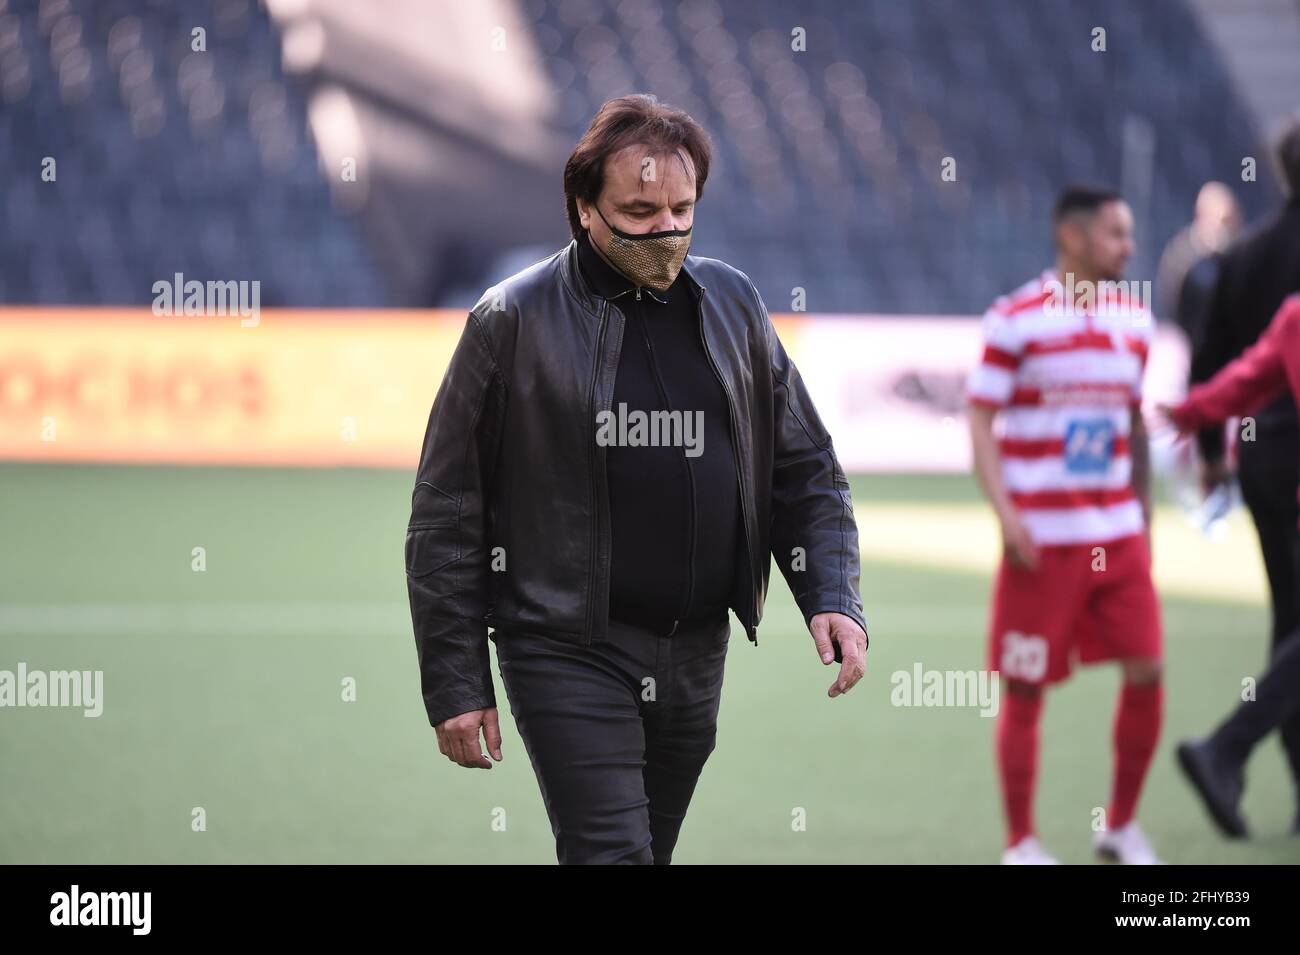 04 25 2021 Bern Wankdorf Soccer Super League Bsc Young Boys Fc Sion 24 Quentin Maceiras Young Boys Versus 77 Sandro Theler Sion Switzerland Croatia Out Stock Photo Alamy